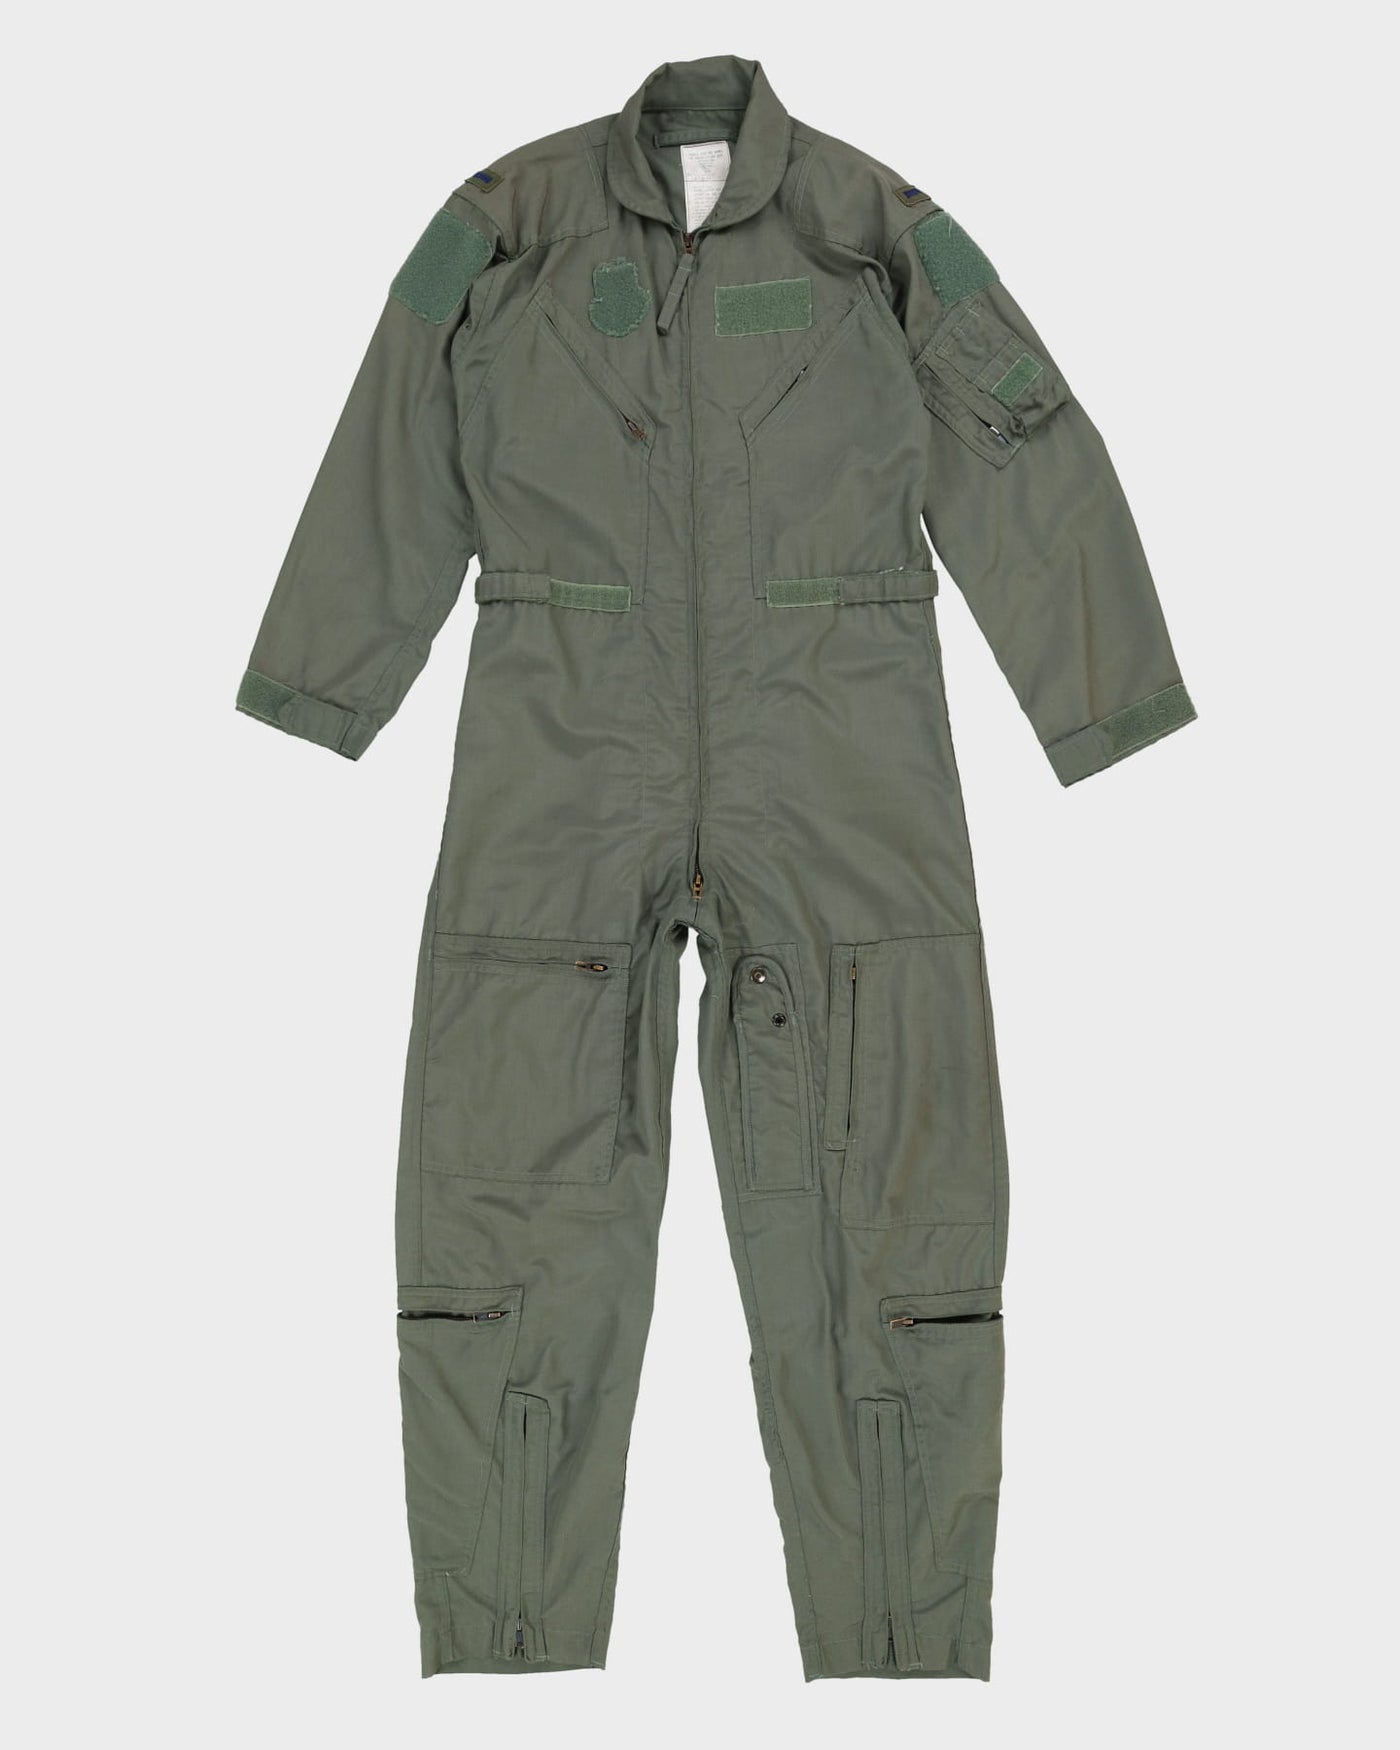 1987 Vintage US Air Force CWU-27/P Aircrew Flight Suit Coveralls - Small